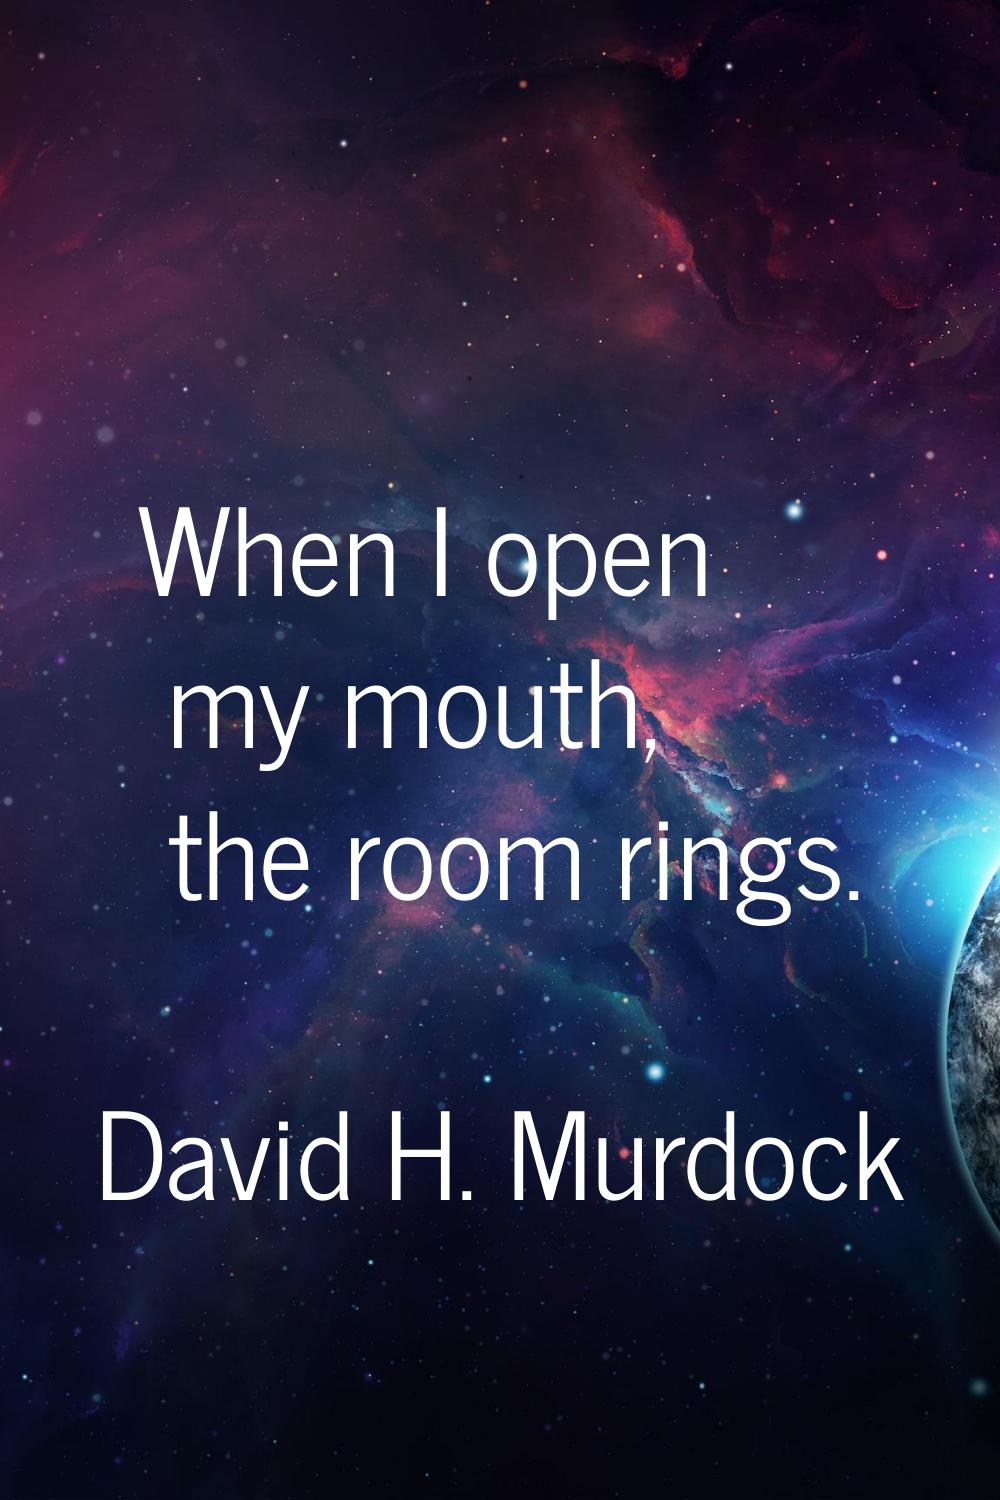 When I open my mouth, the room rings.